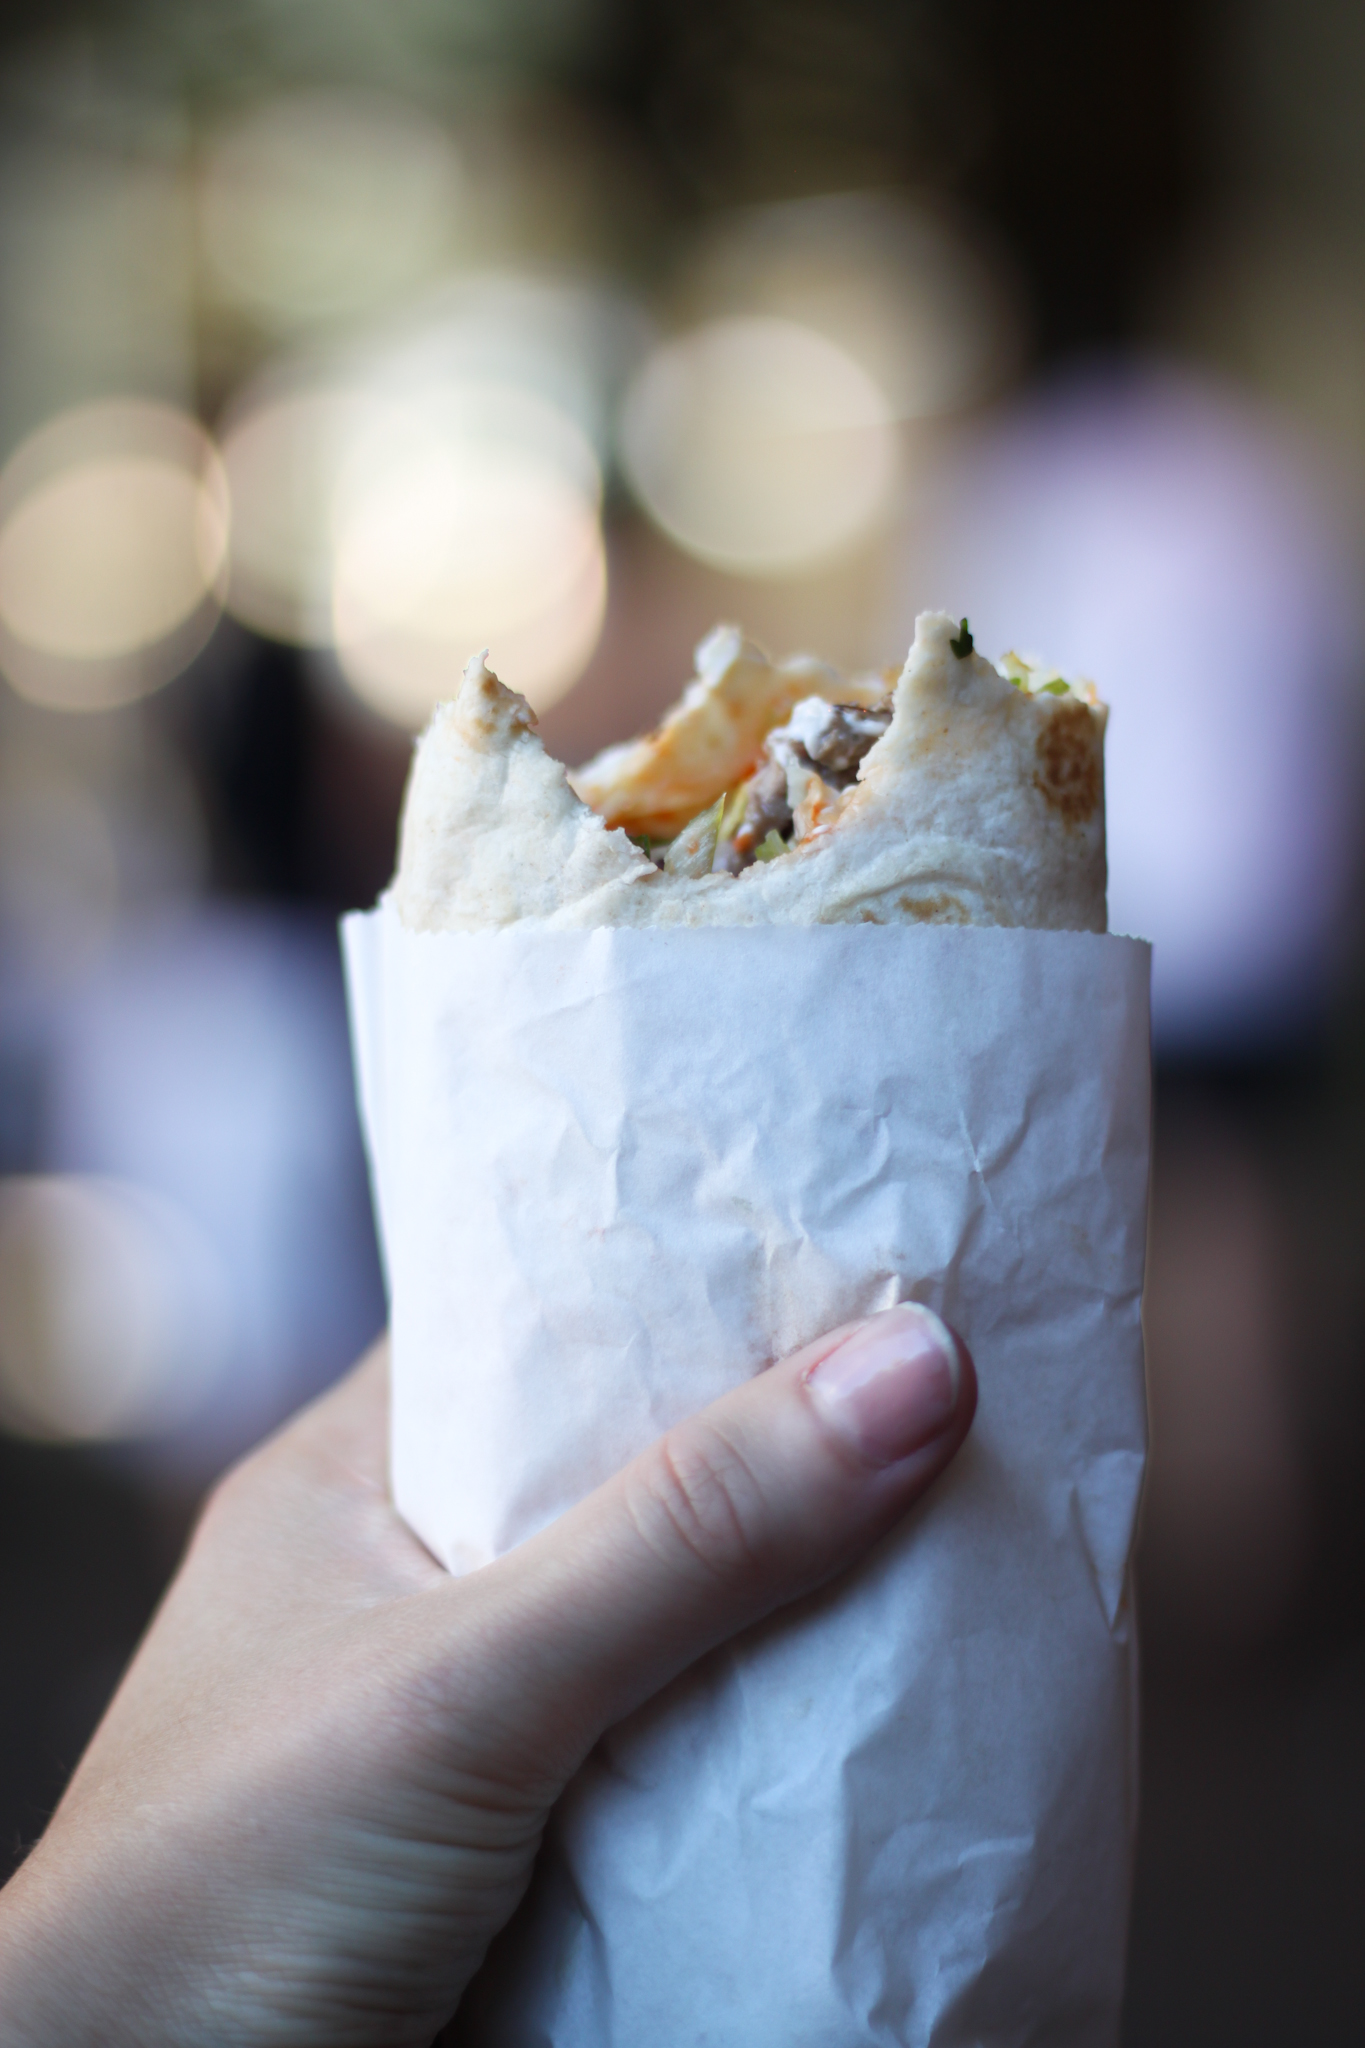  Probably the freshest, yummiest burrito ever in the heart of London 